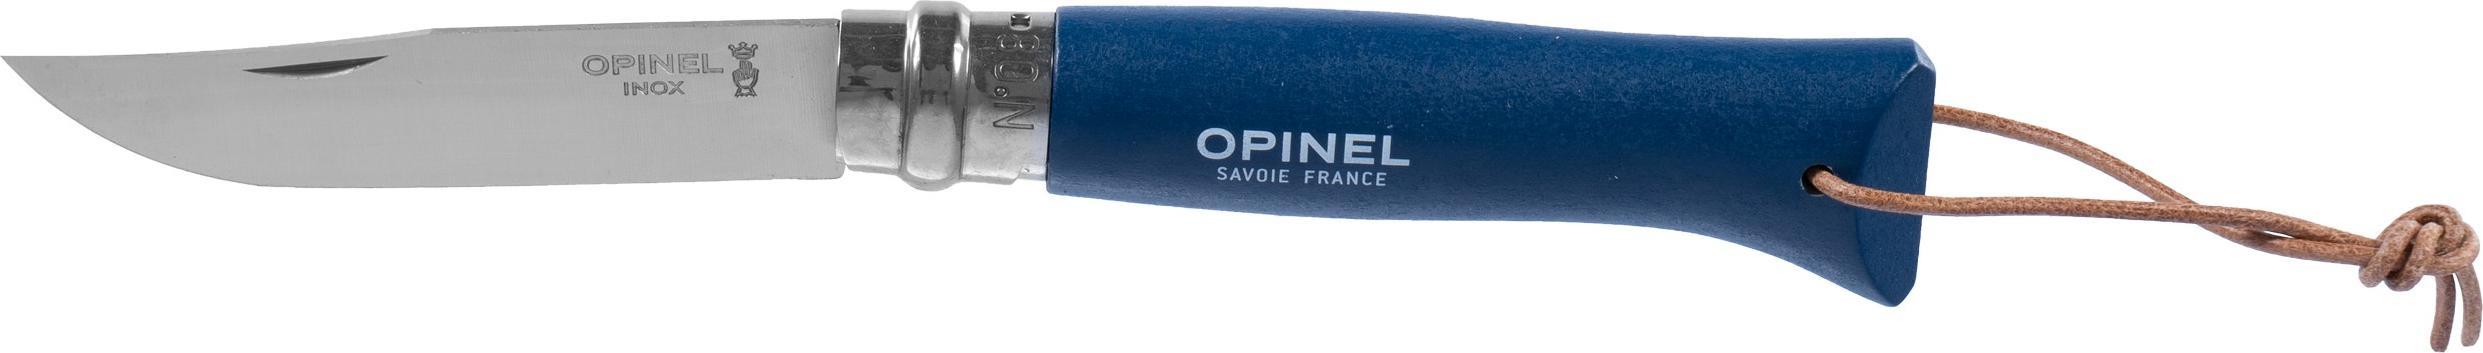 Opinel No. 08 blue with sheath nazis